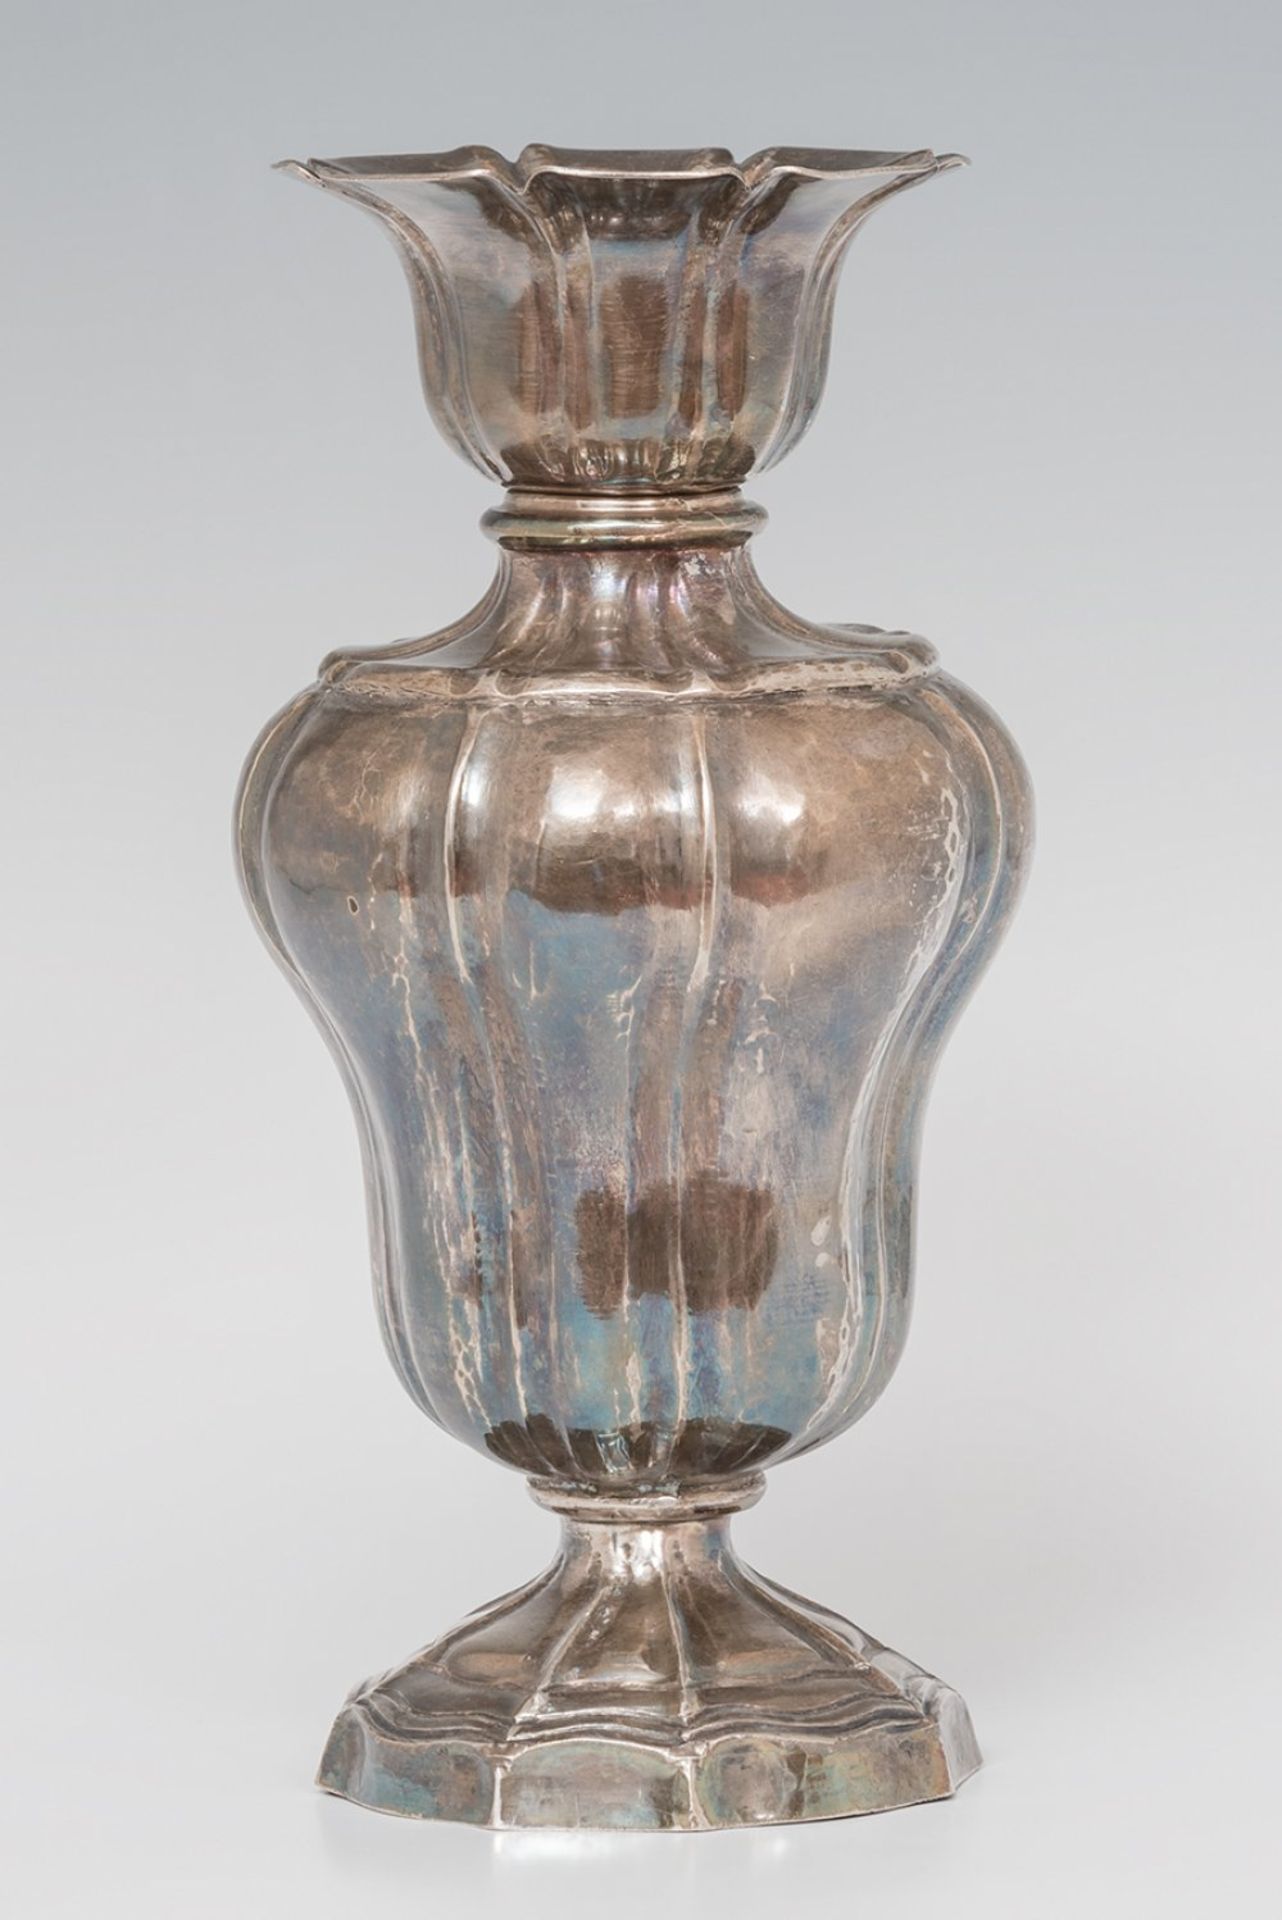 Altar vase in stamped silver. Mexico. 18th centuryWeight: 959.1 g. Measure: 27.5 x 14 cm.Vase - Image 4 of 6